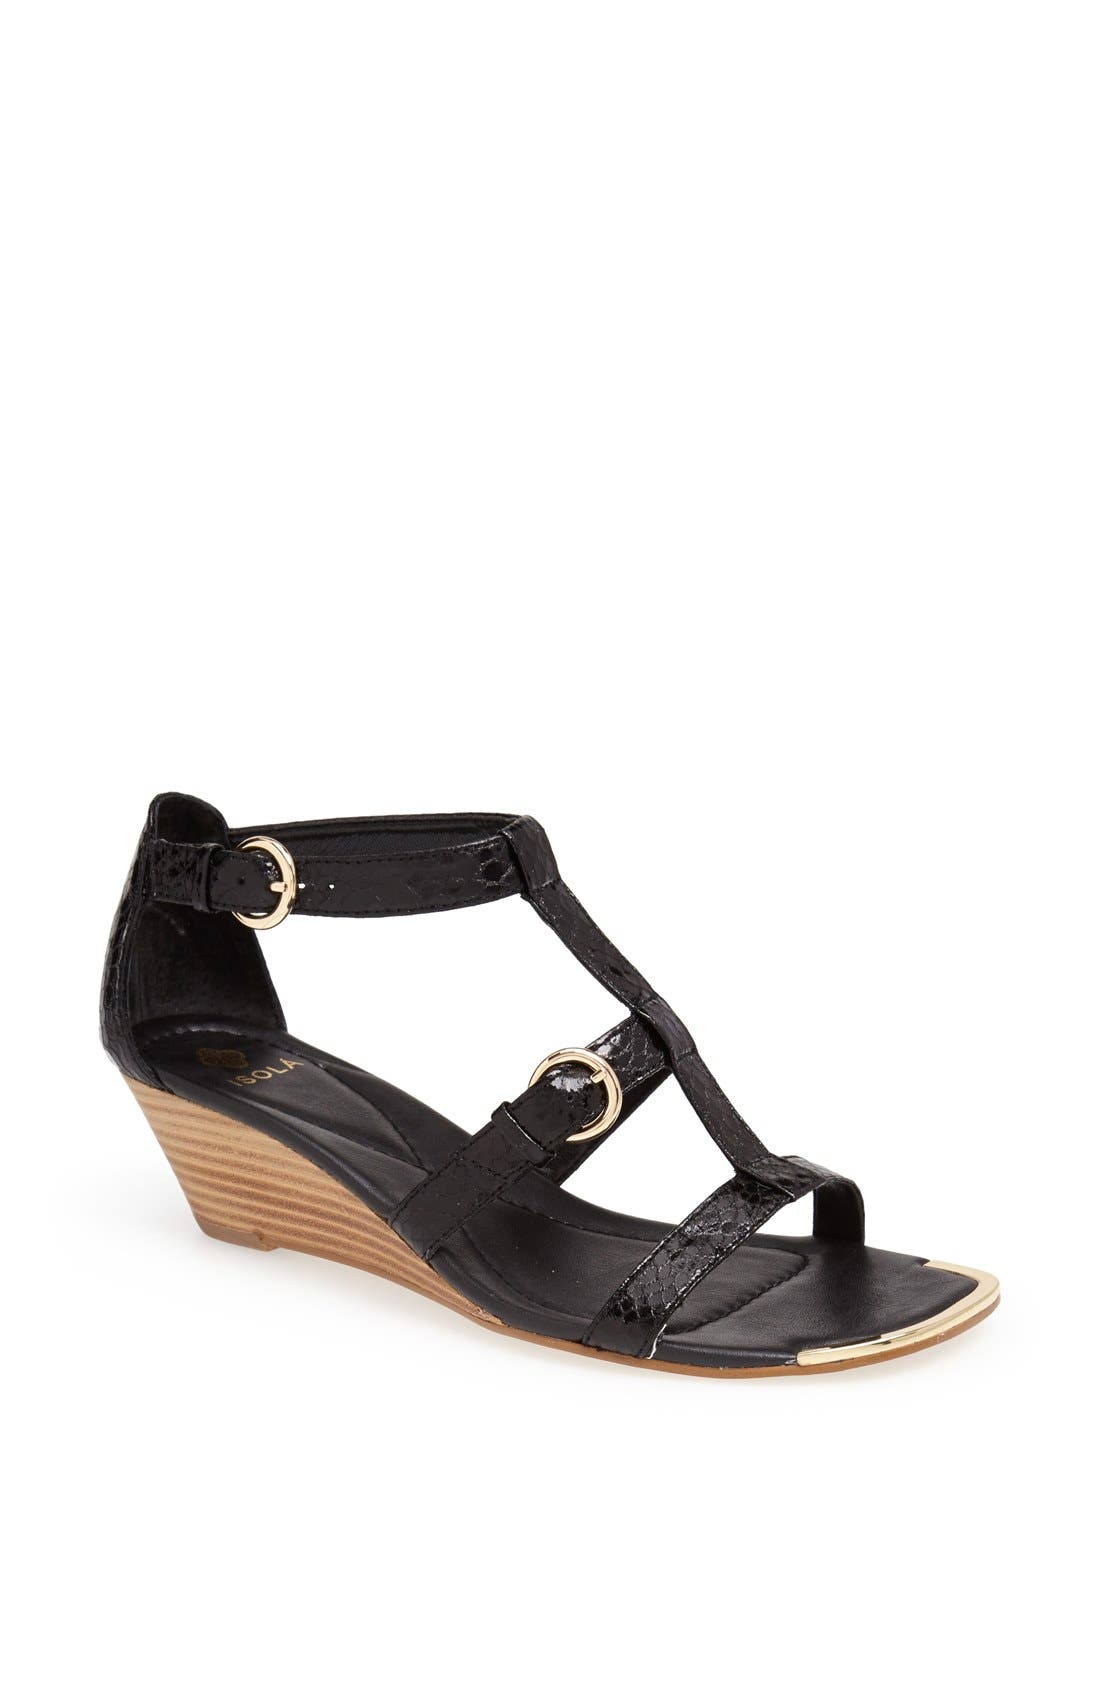 isola shoes nordstrom